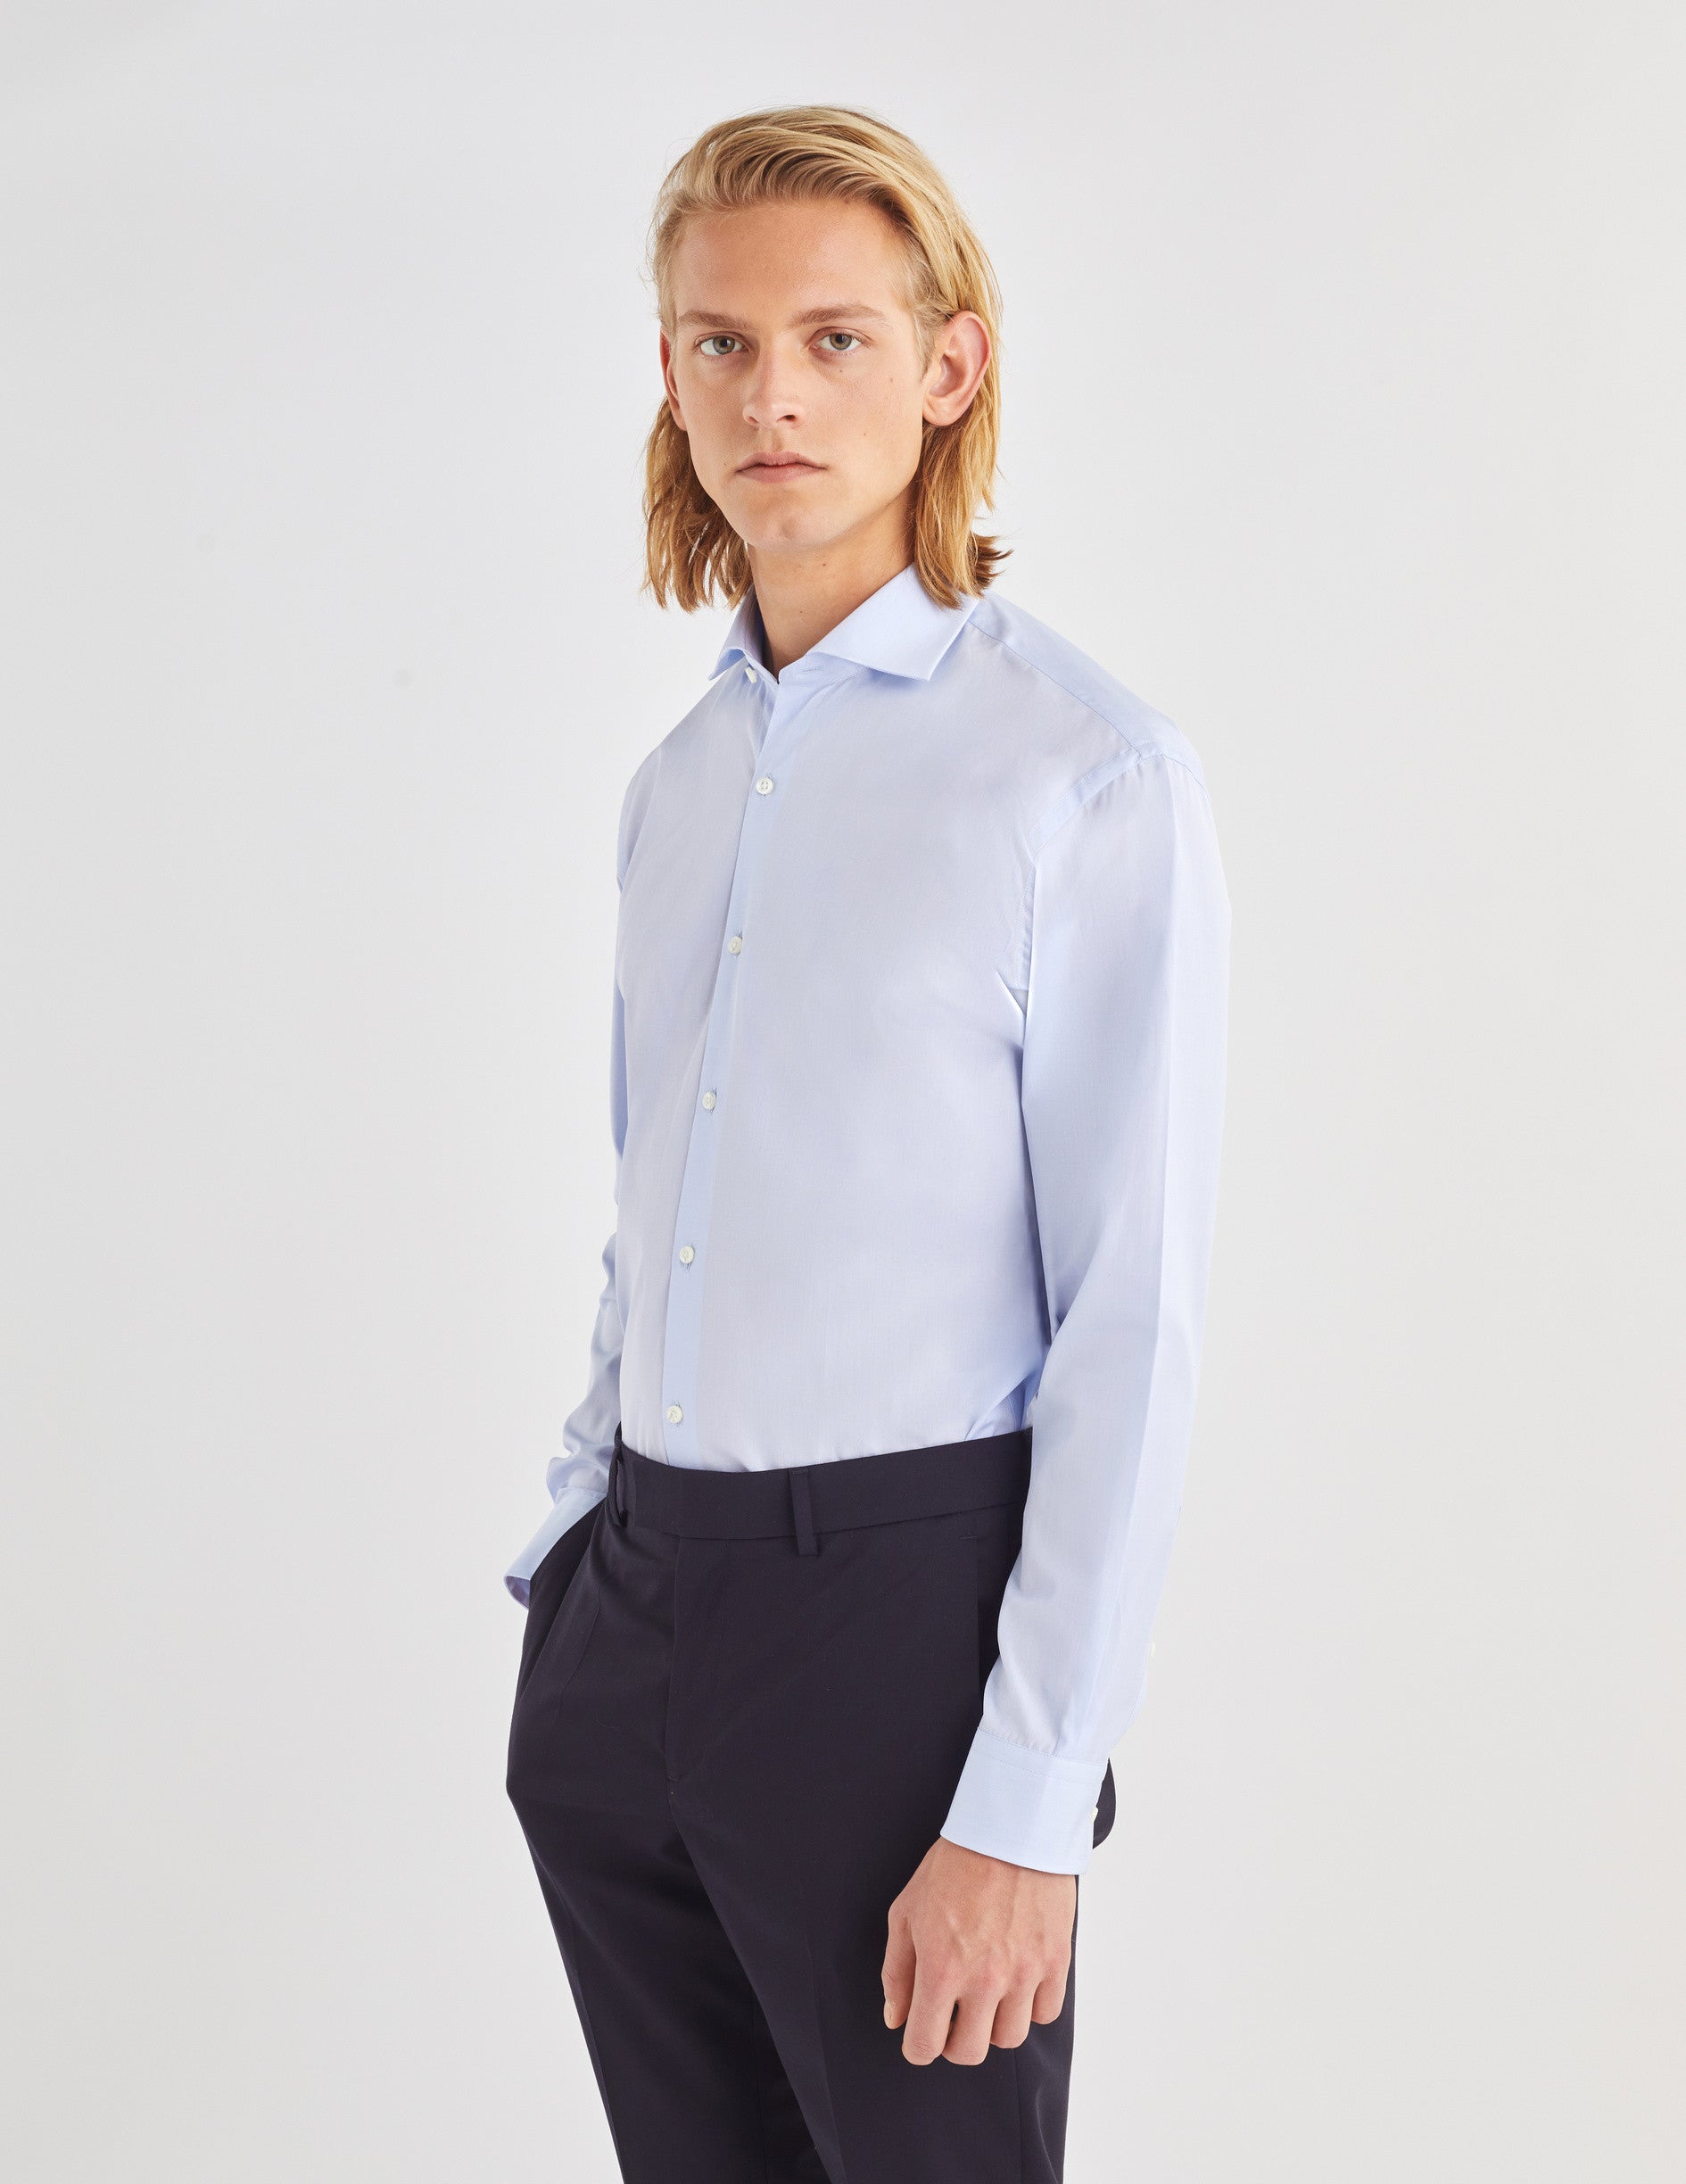 Classic blue shirt - Wire to wire - Italian Collar